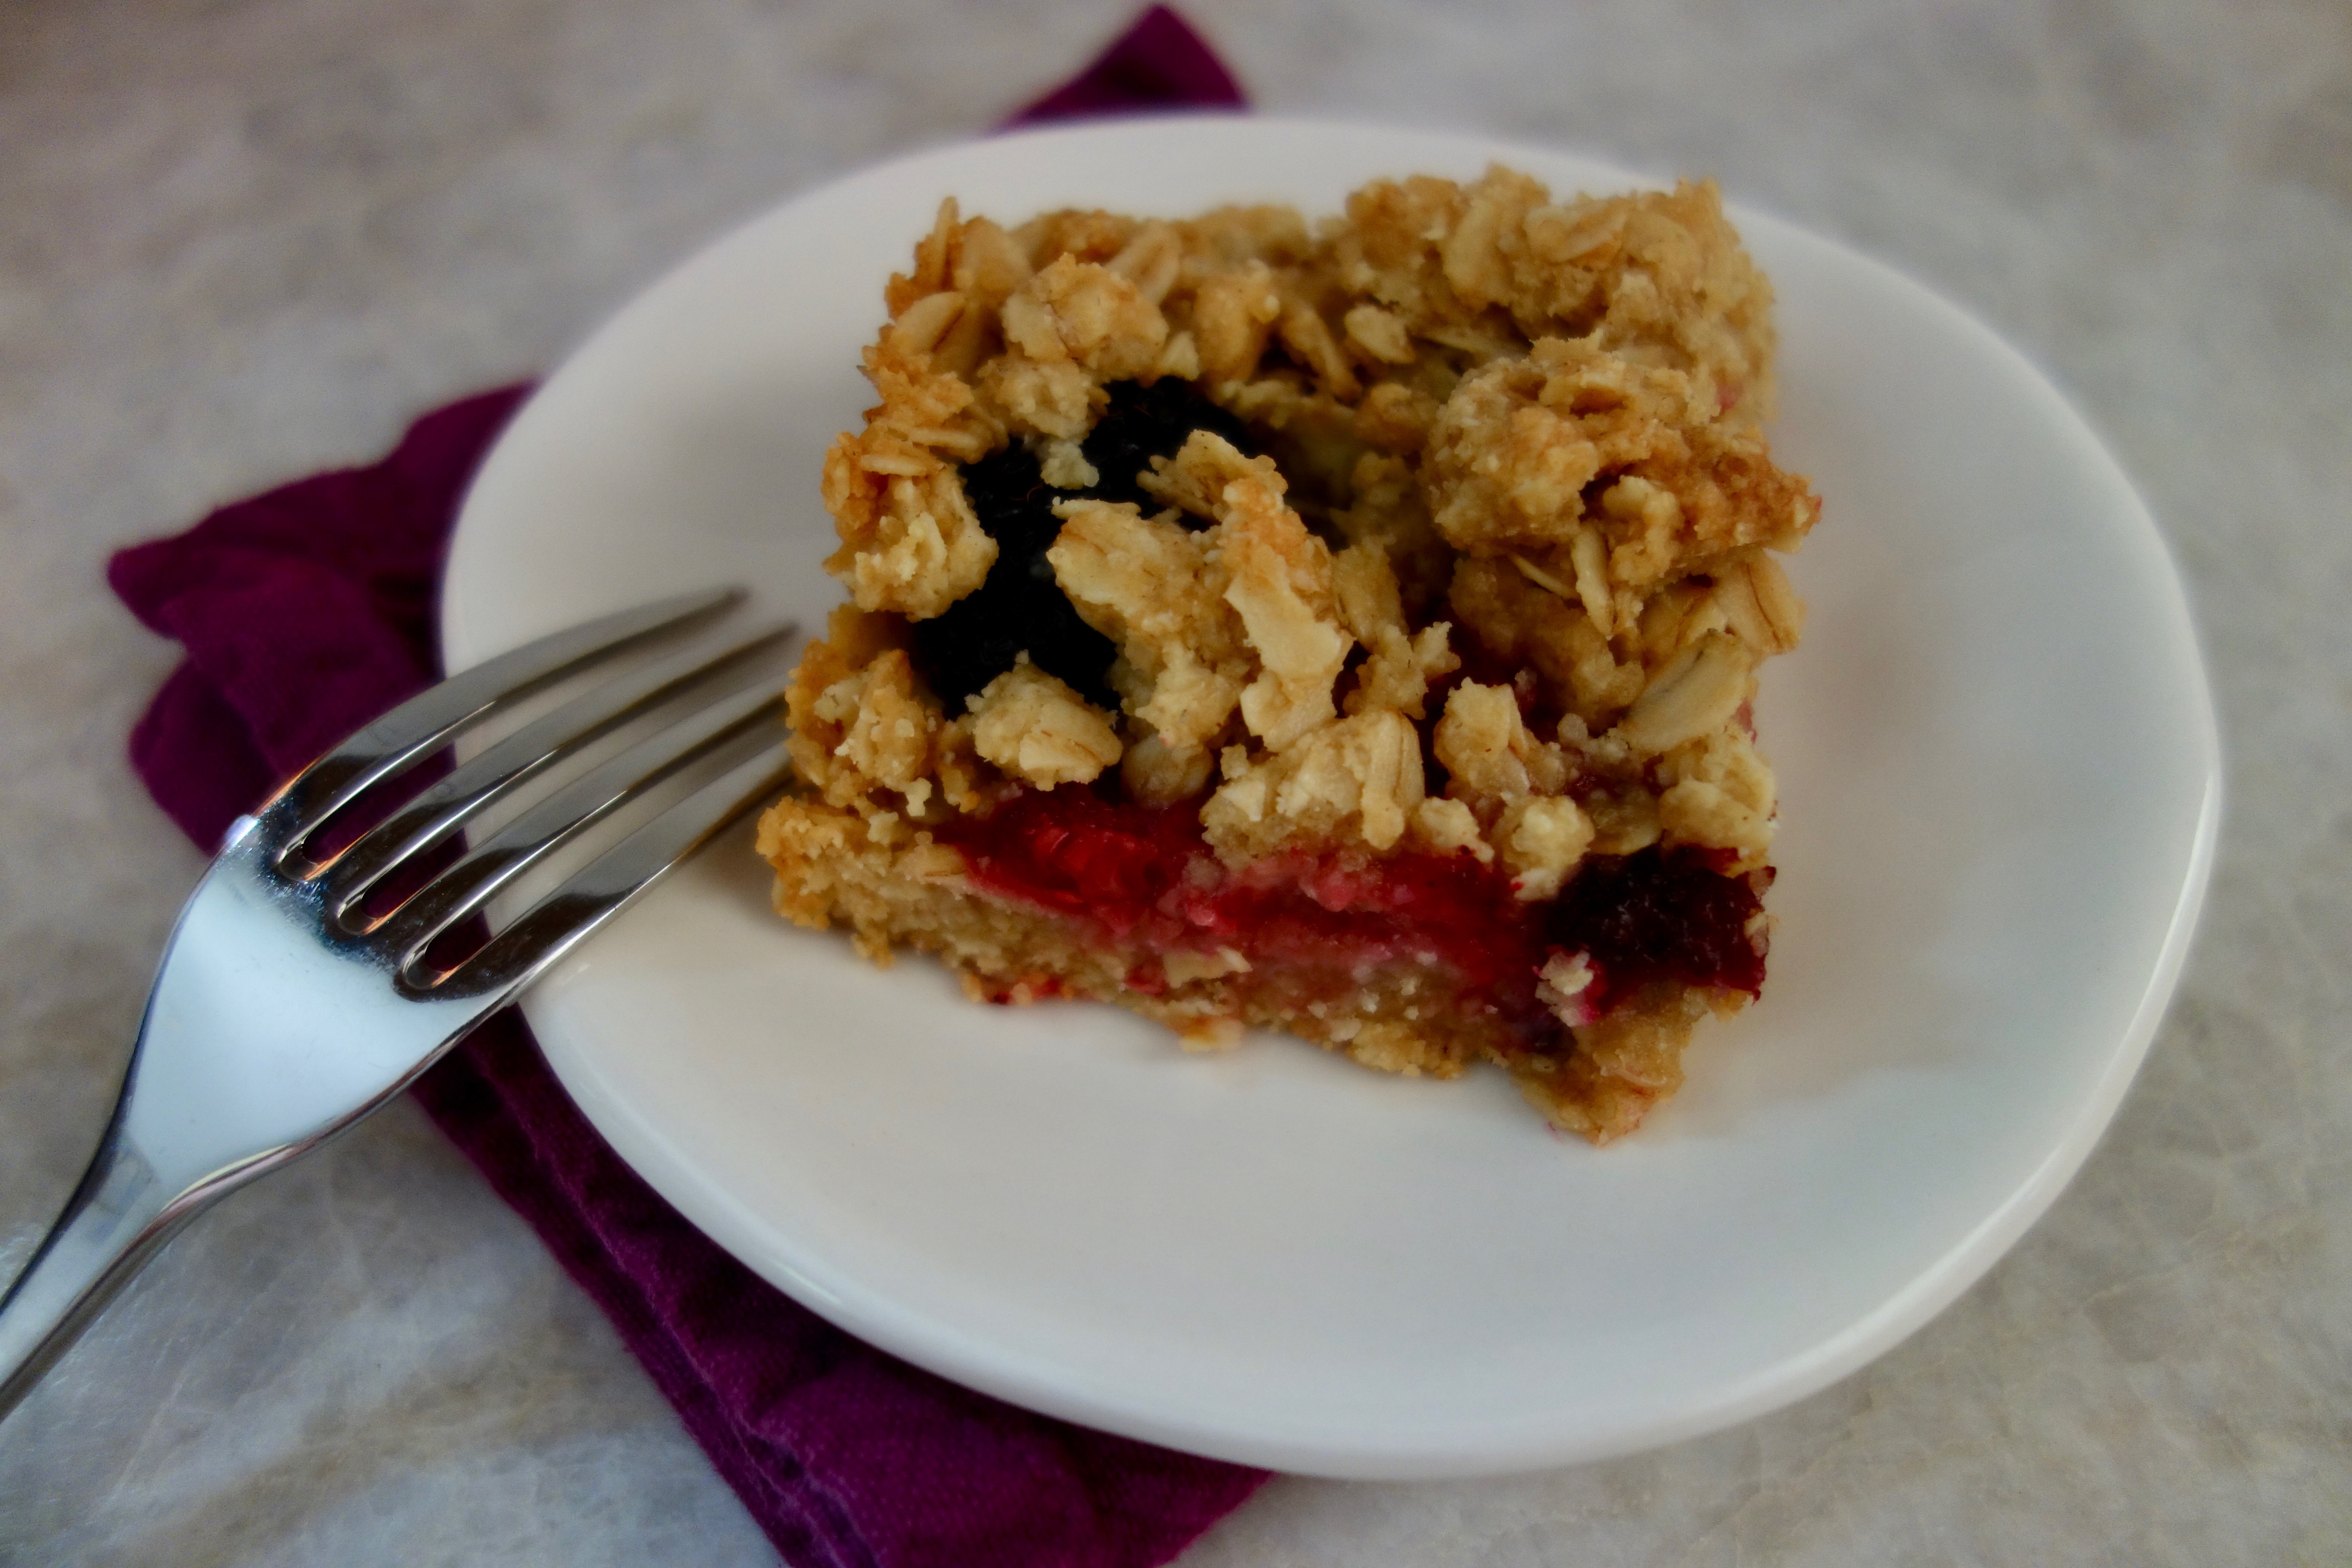 single square of oatmeal crumble berry bar on plate with fork and purple napkin